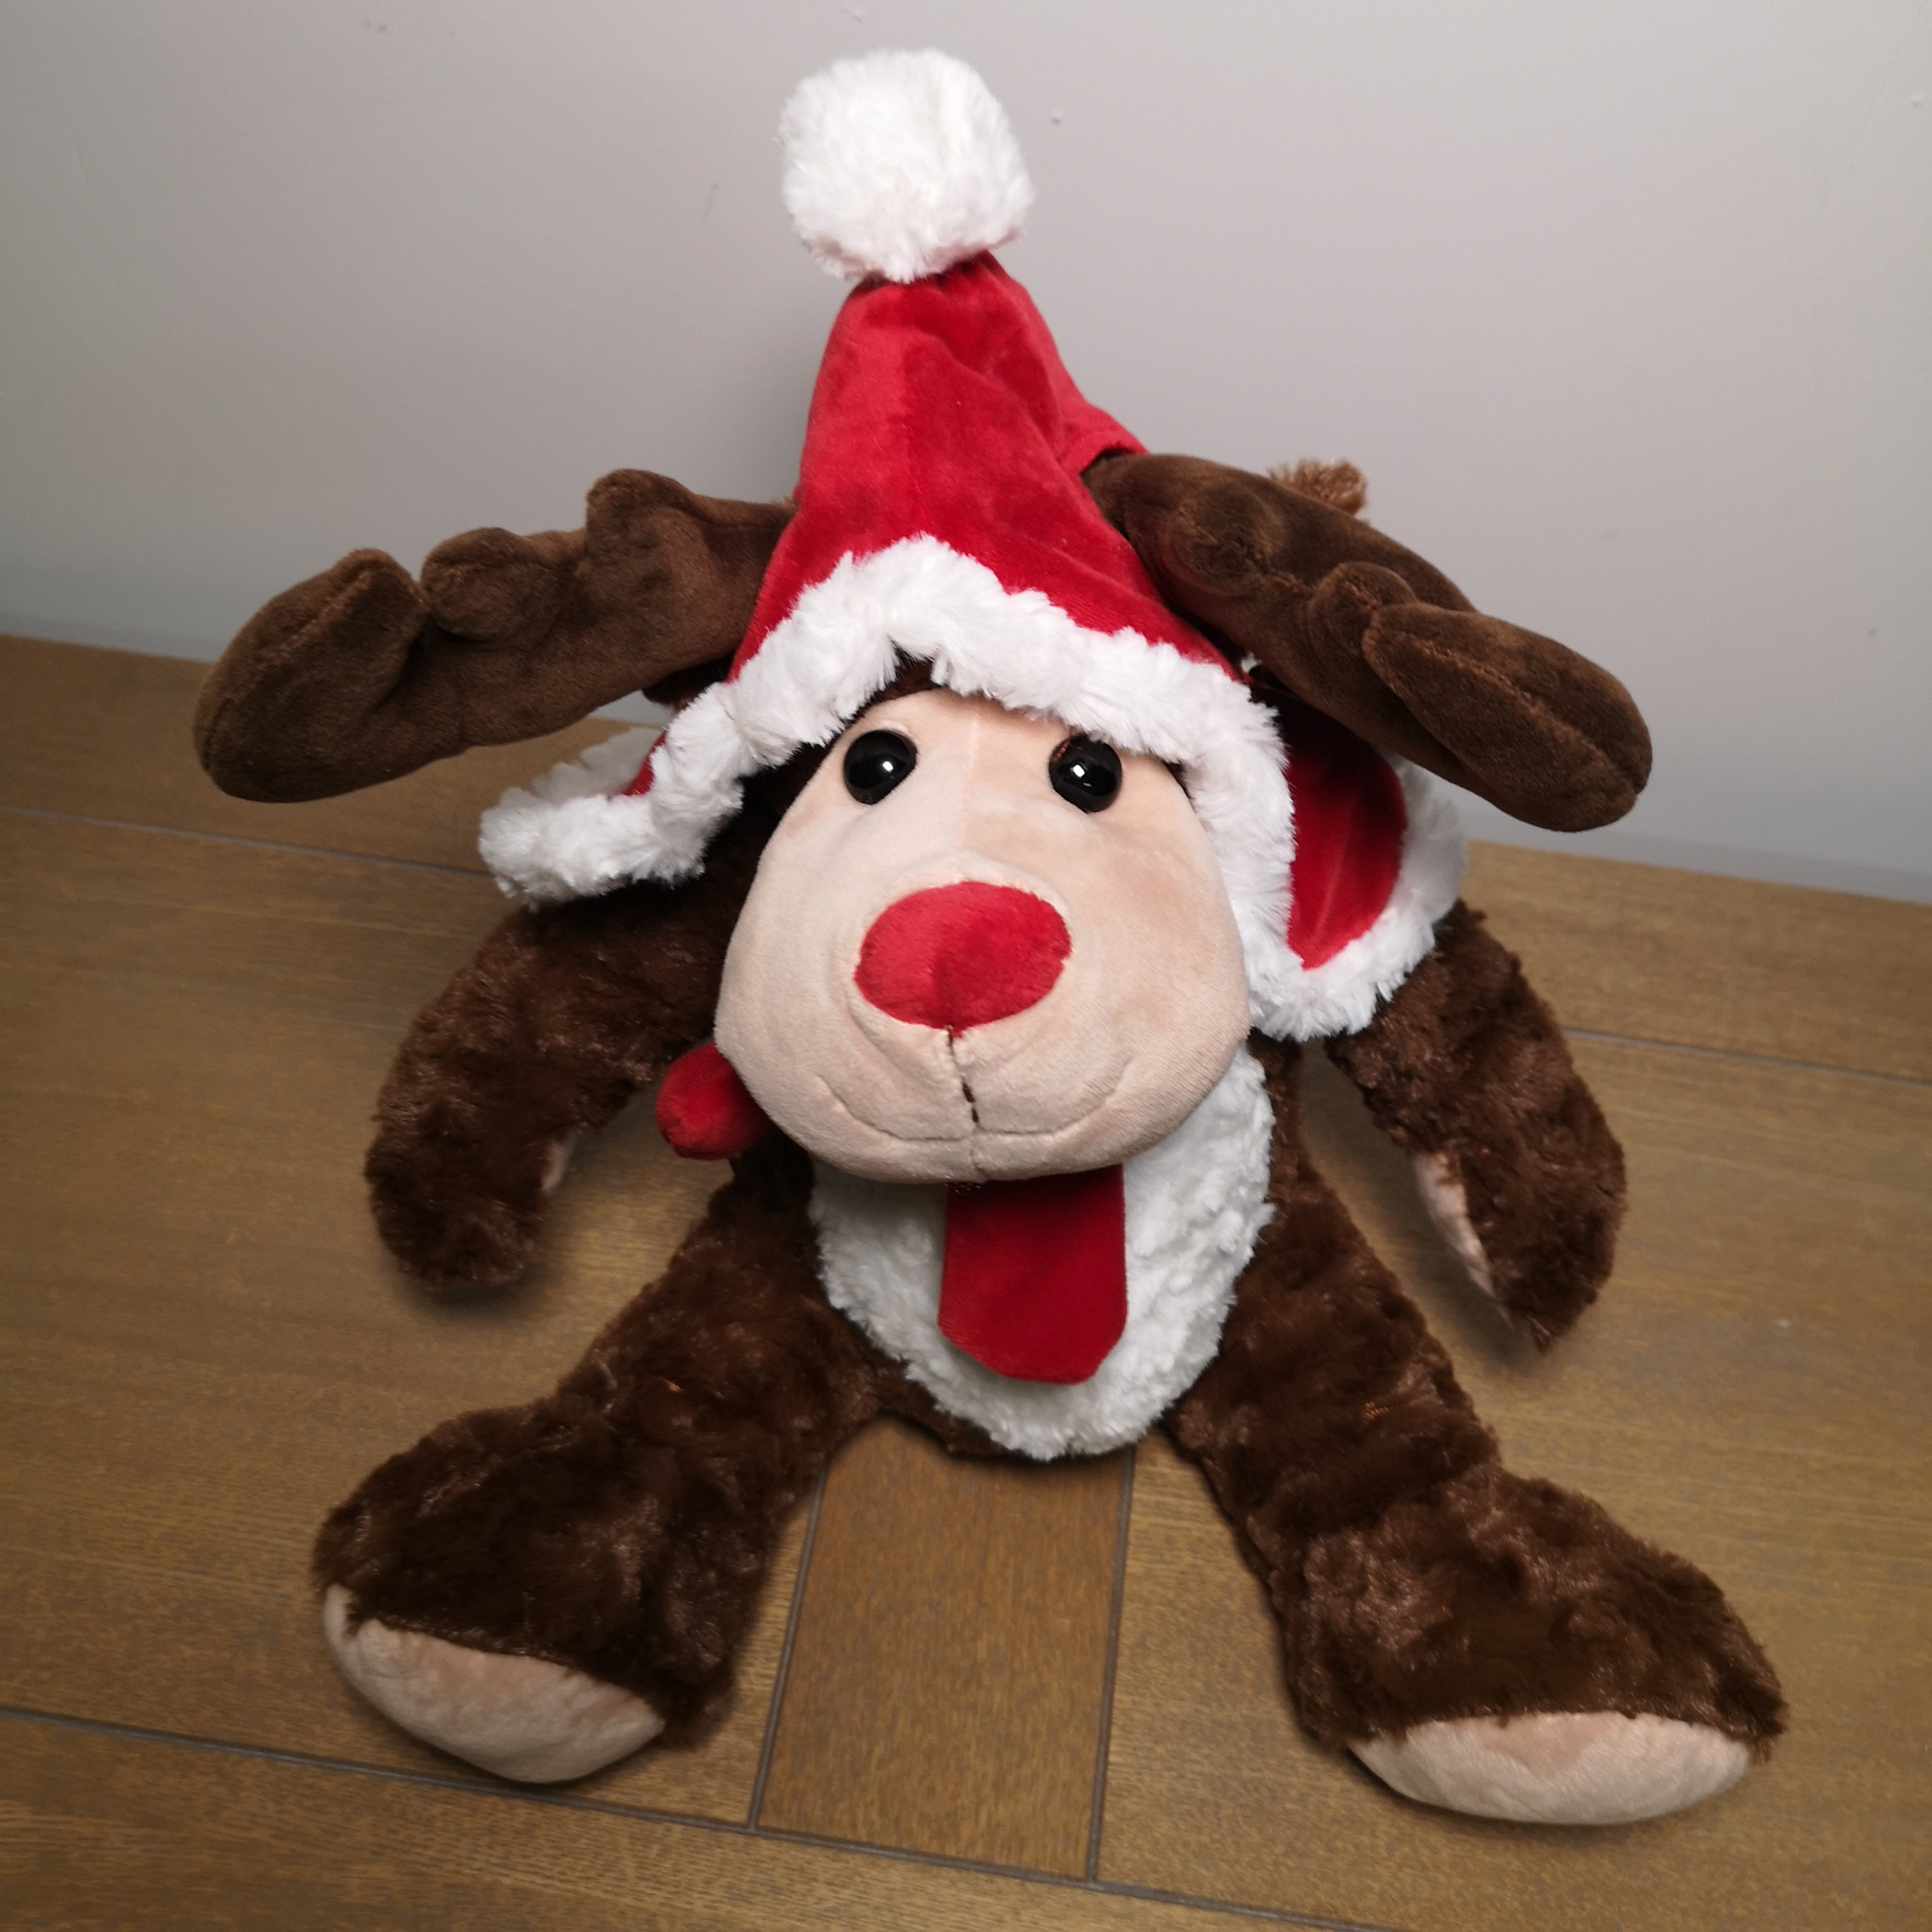 30cm Sitting Plush Christmas Reindeer with Red Hat & Scarf